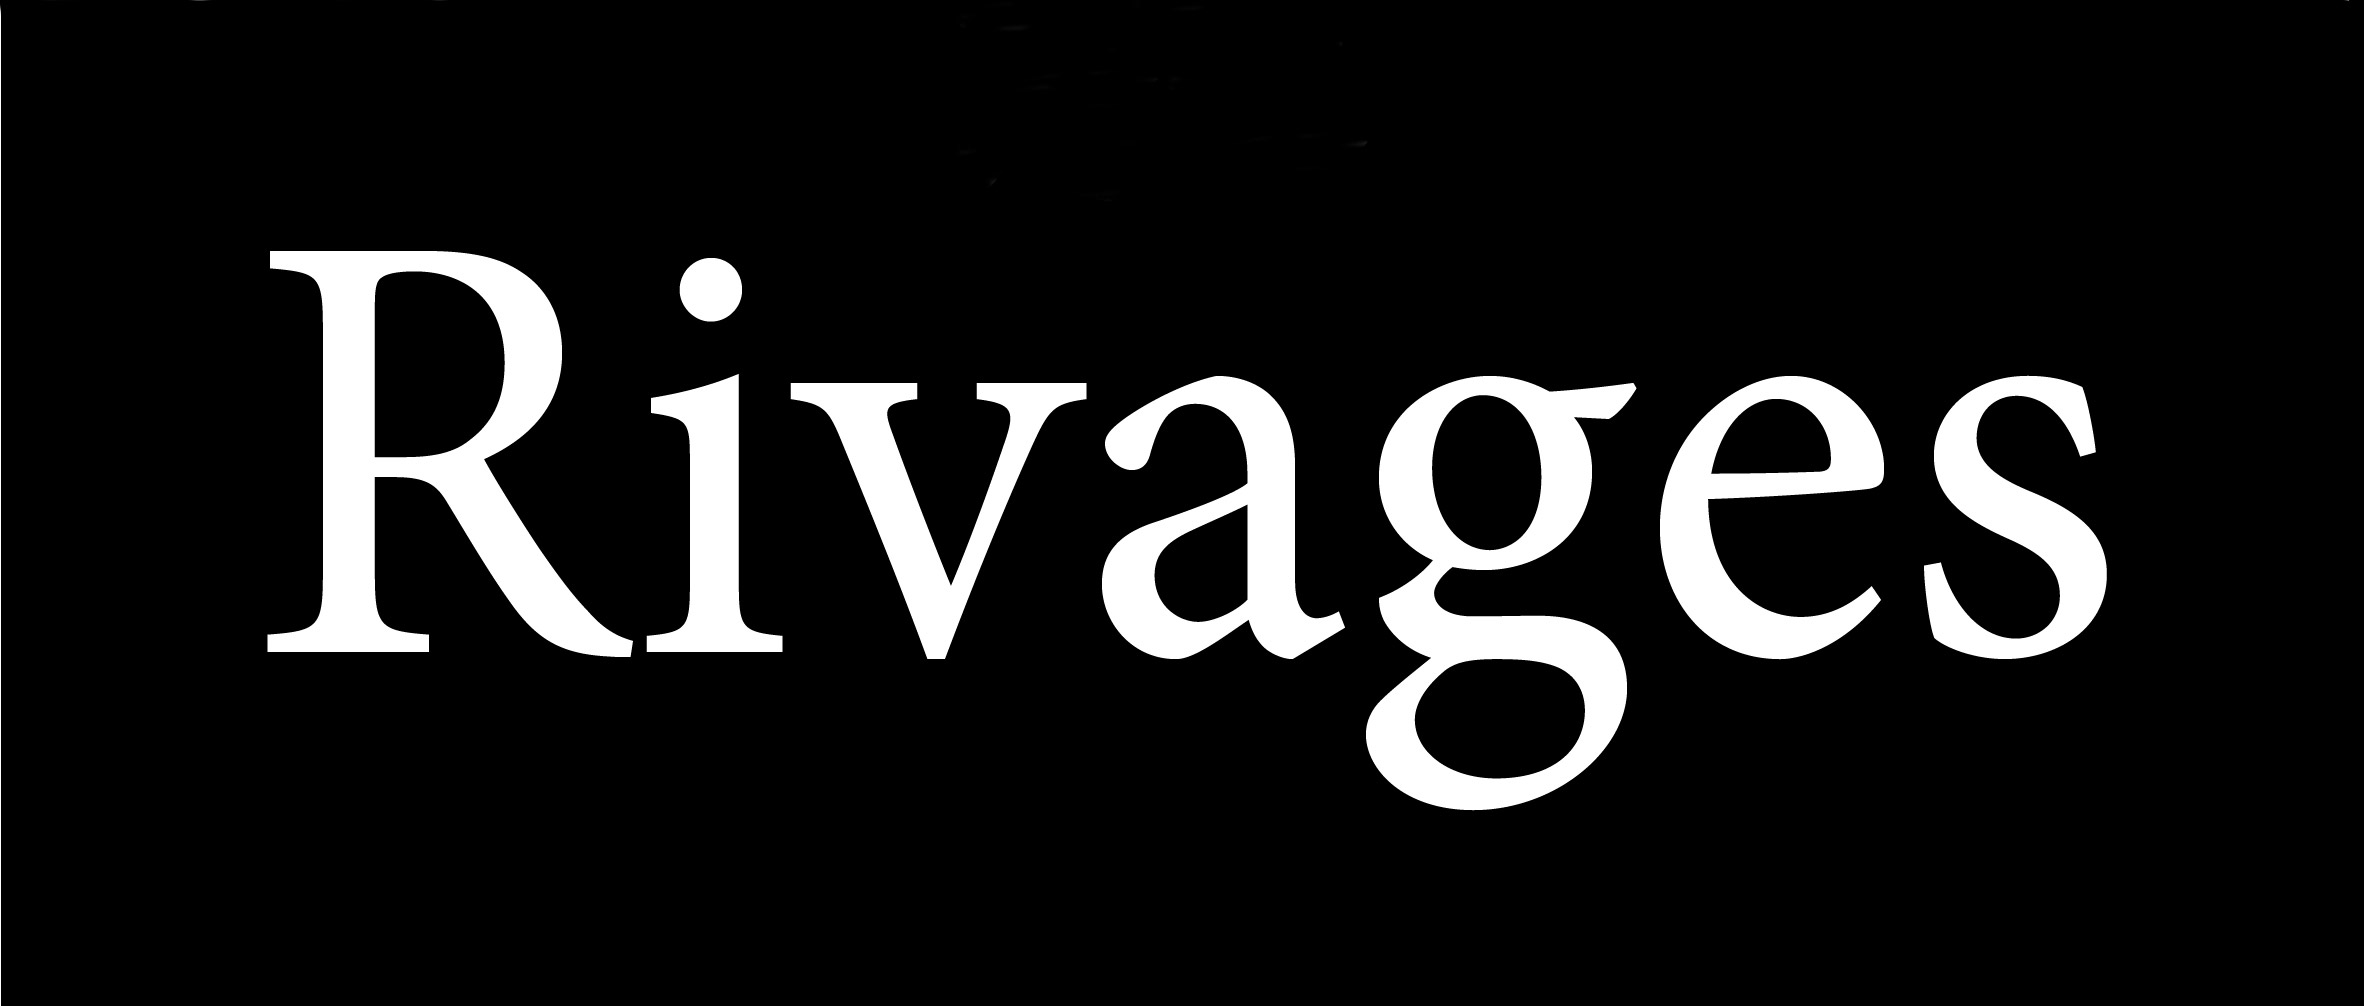 Editions Rivages